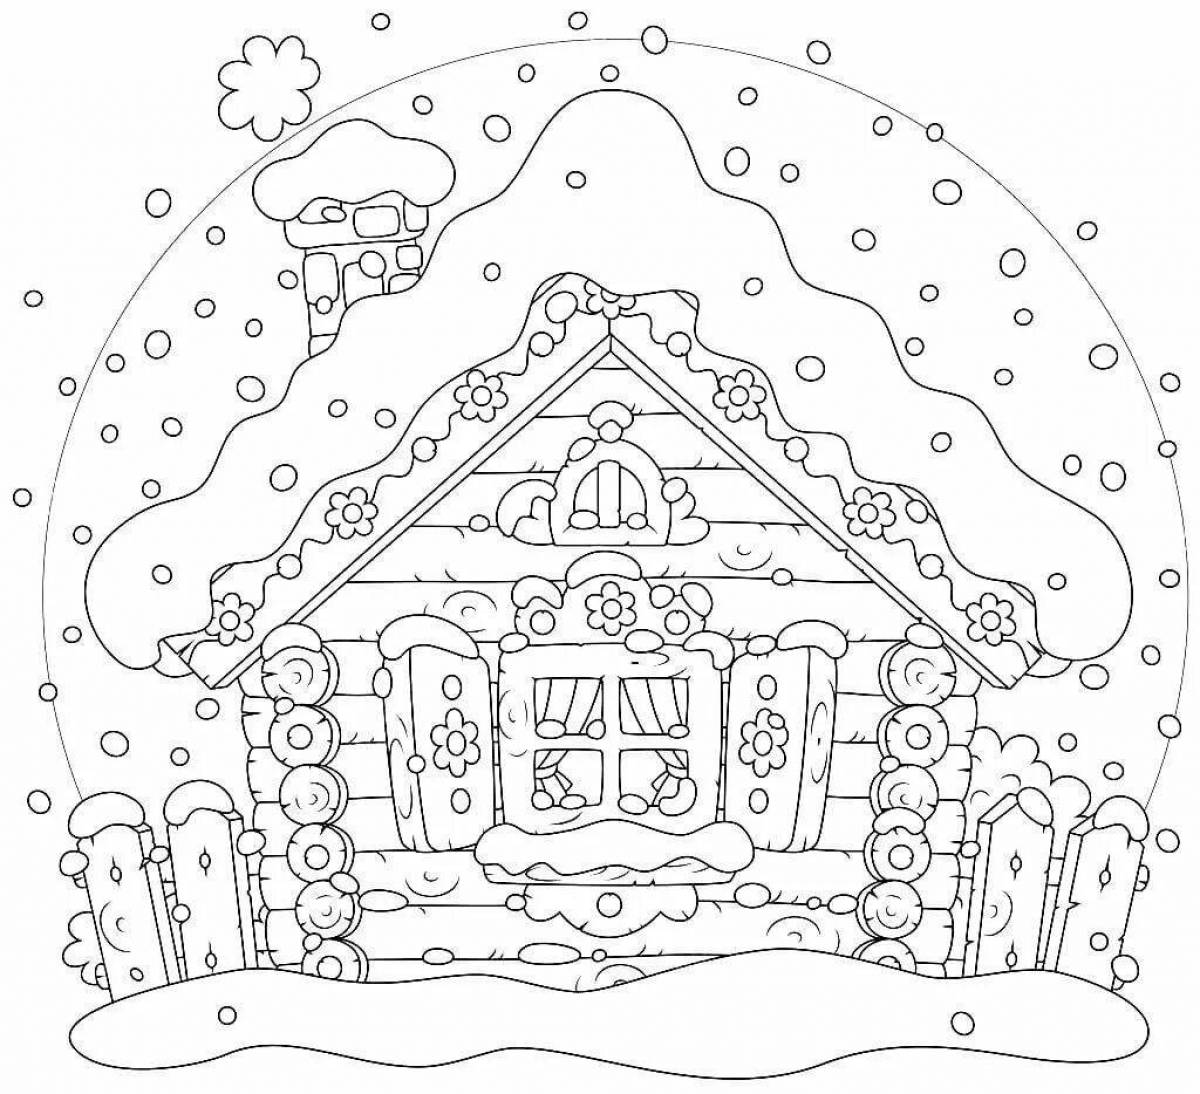 Coloring book magical hut for children